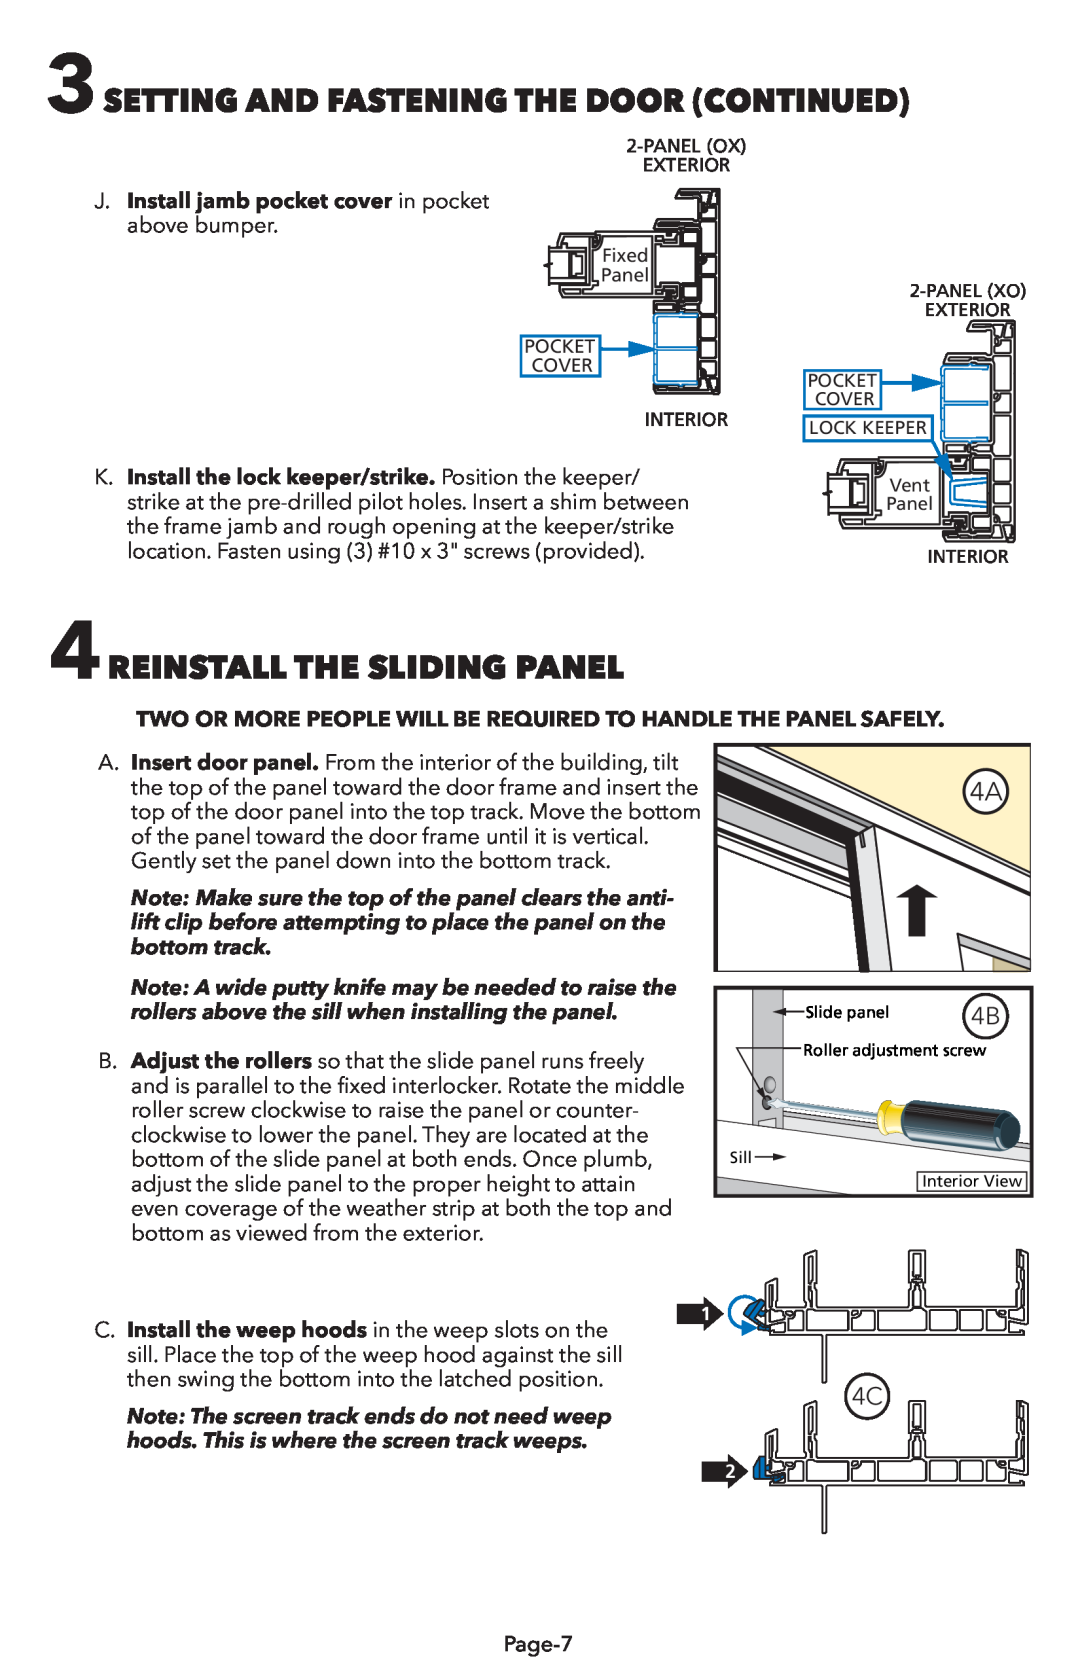 Pella V983492 installation instructions 4REINSTALL THE SLIDING PANEL, 3SETTING AND FASTENING THE DOOR CONTINUED 